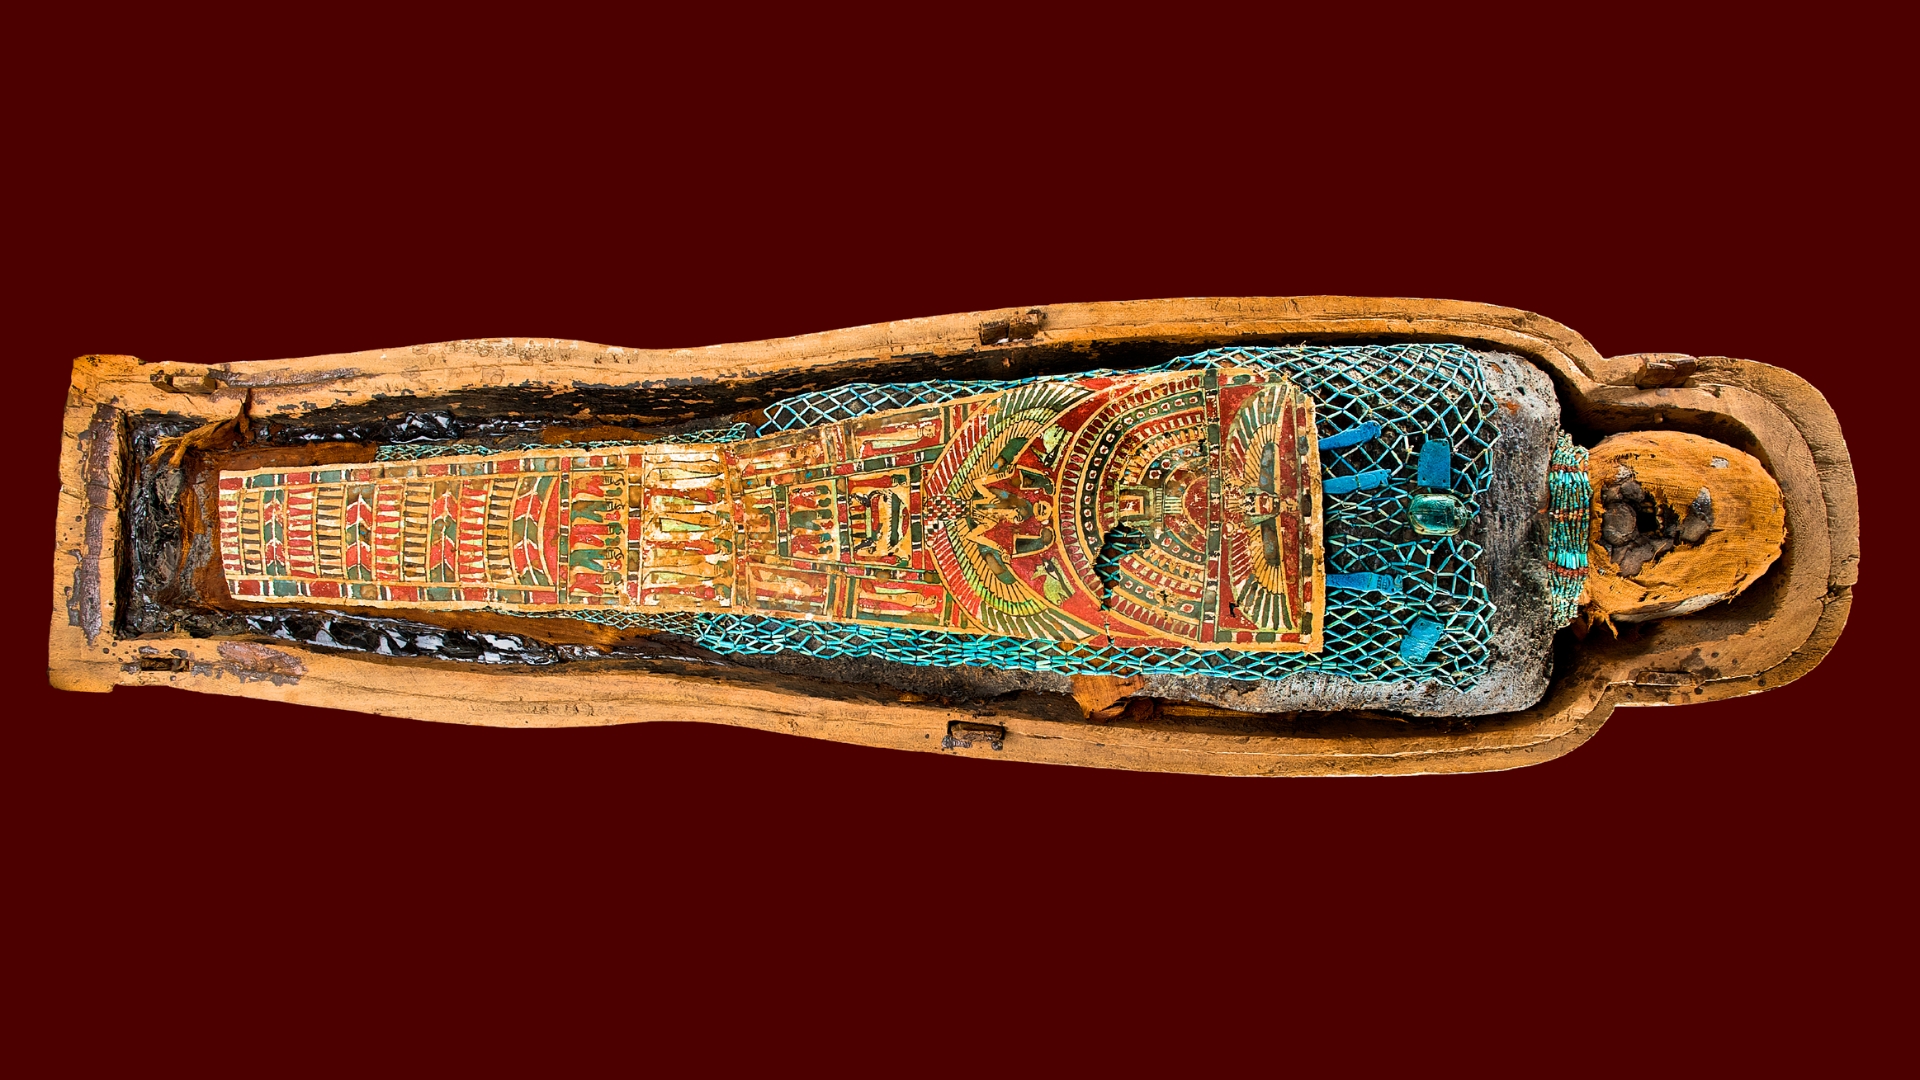 Image of sarcophagus from Mummies of the World: Exhibition featured at the Discovery Center of Idaho.